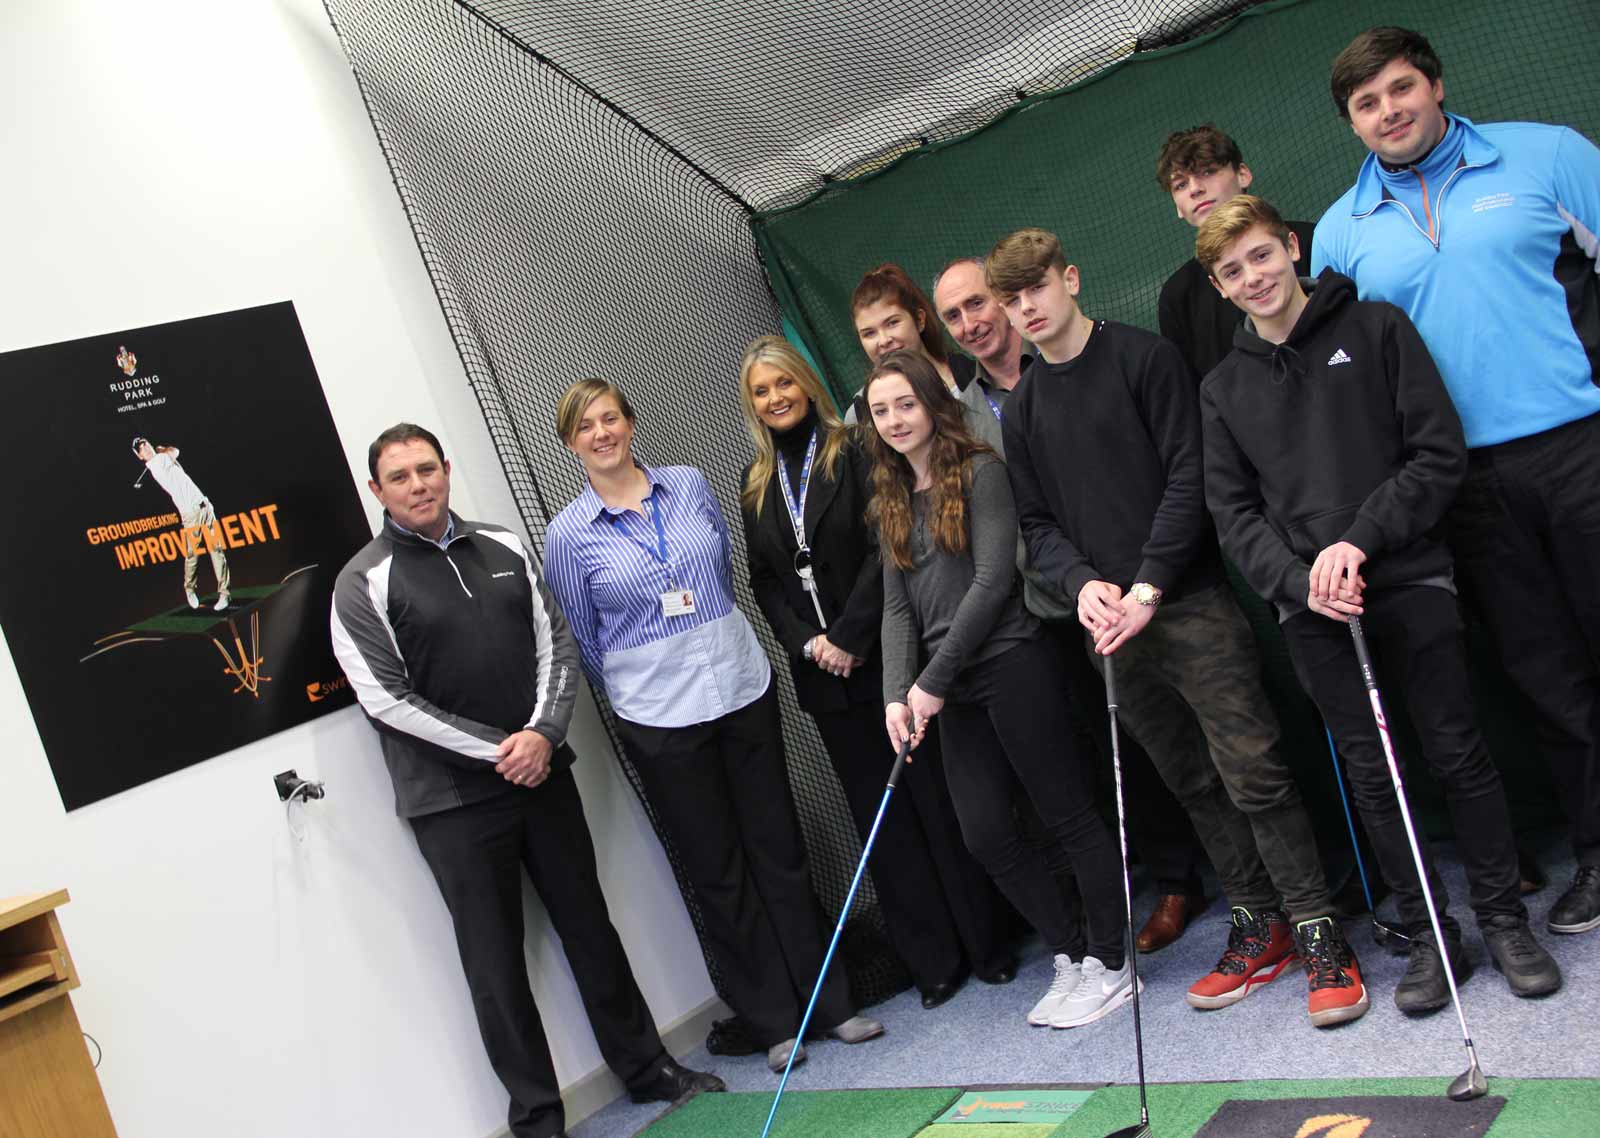 Harrogate College and Rudding Park Golf Academy are teaming up in a community partnership